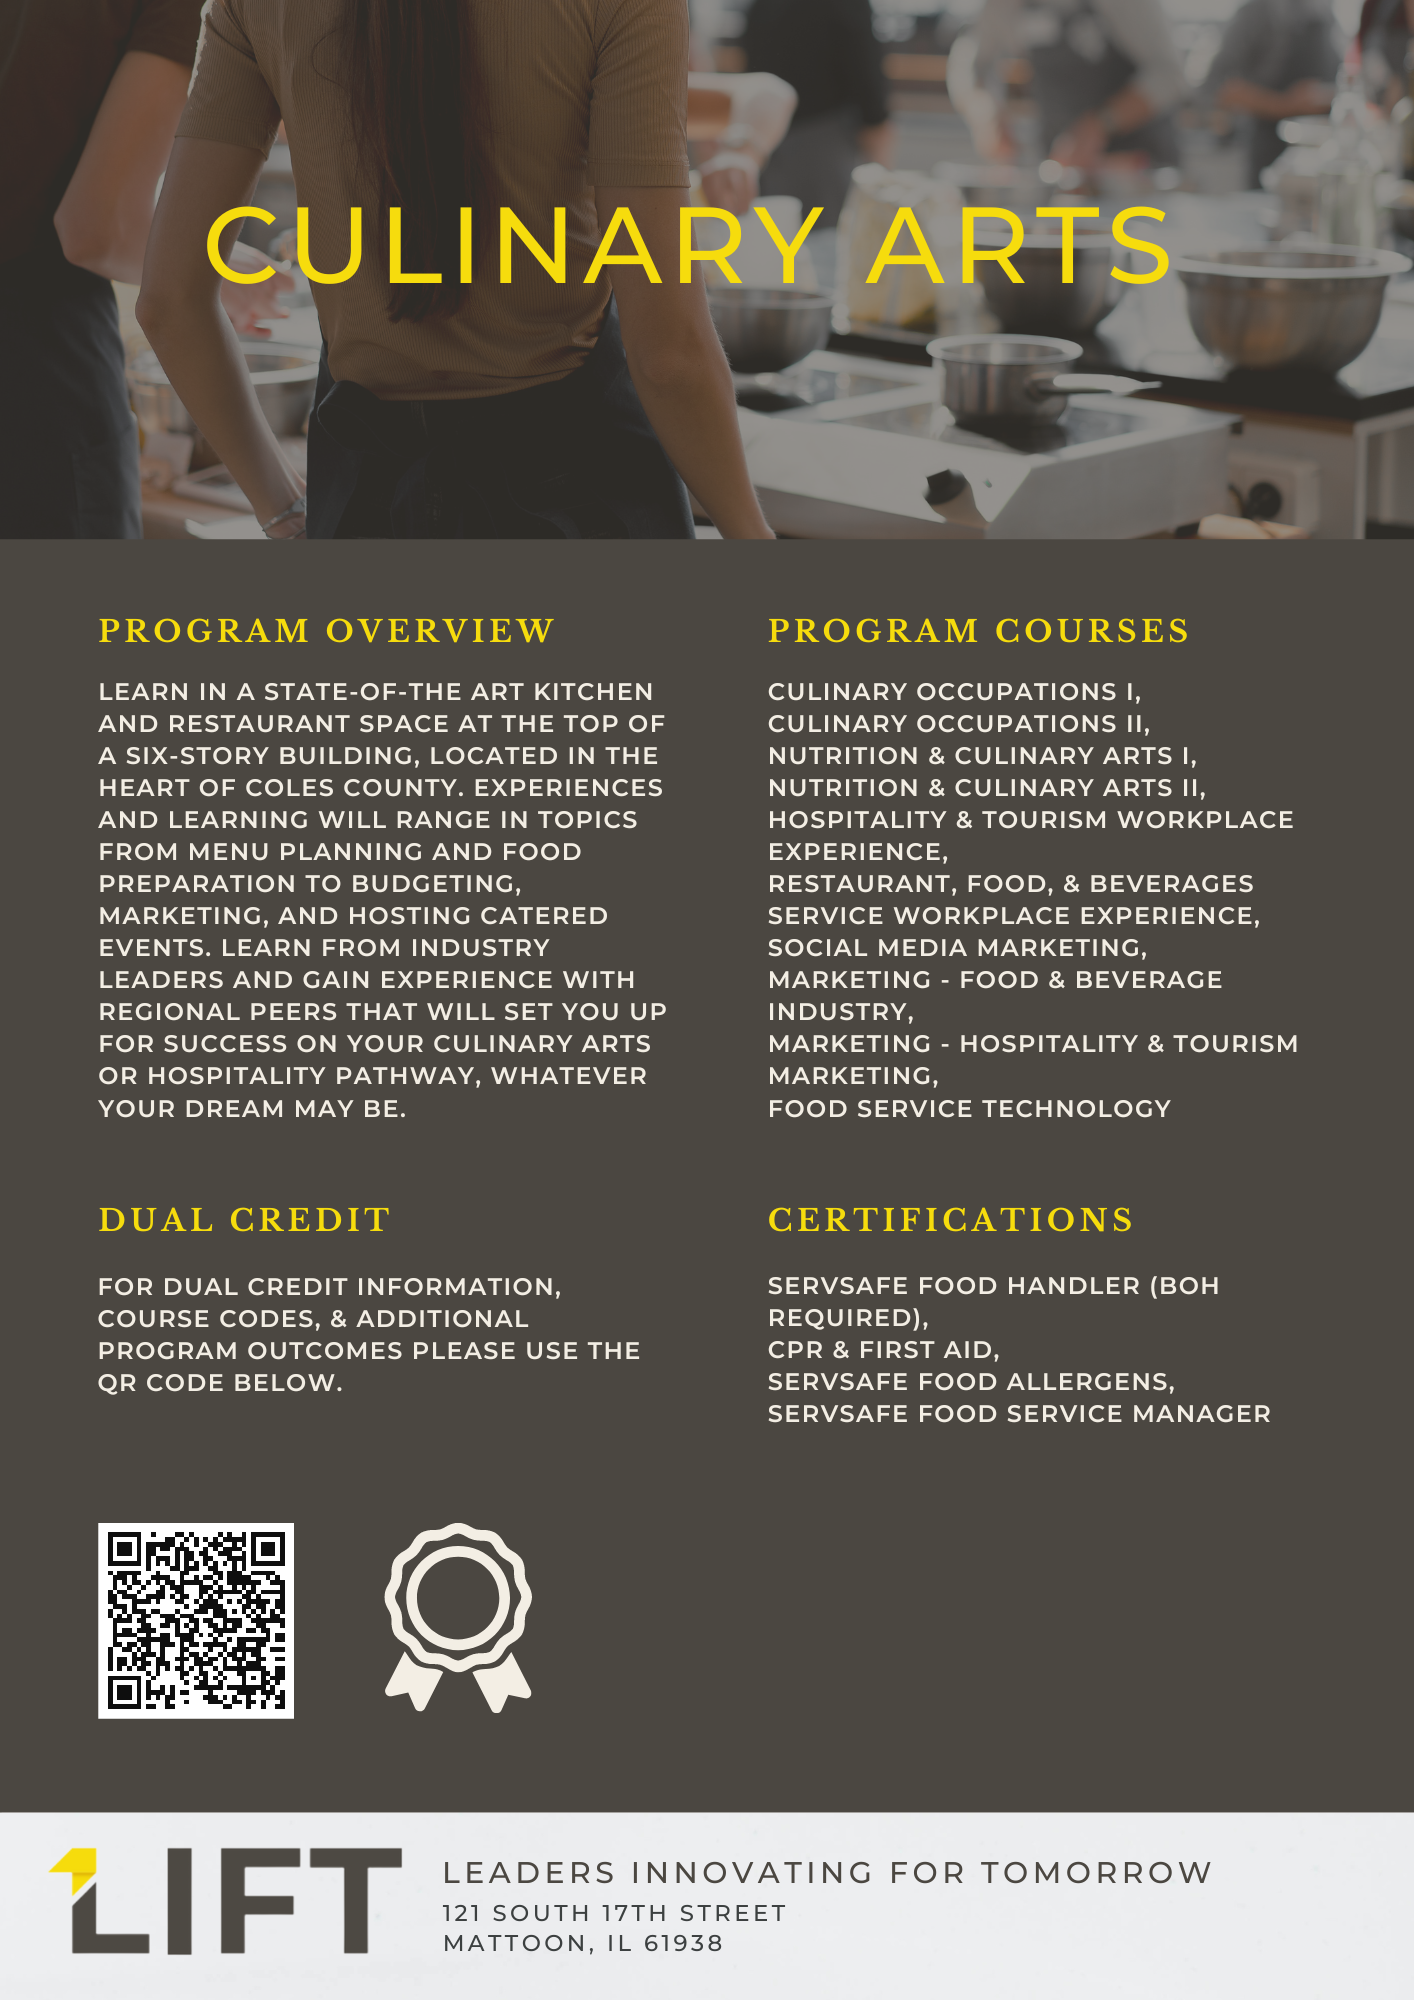 Culinary Arts Program Overview